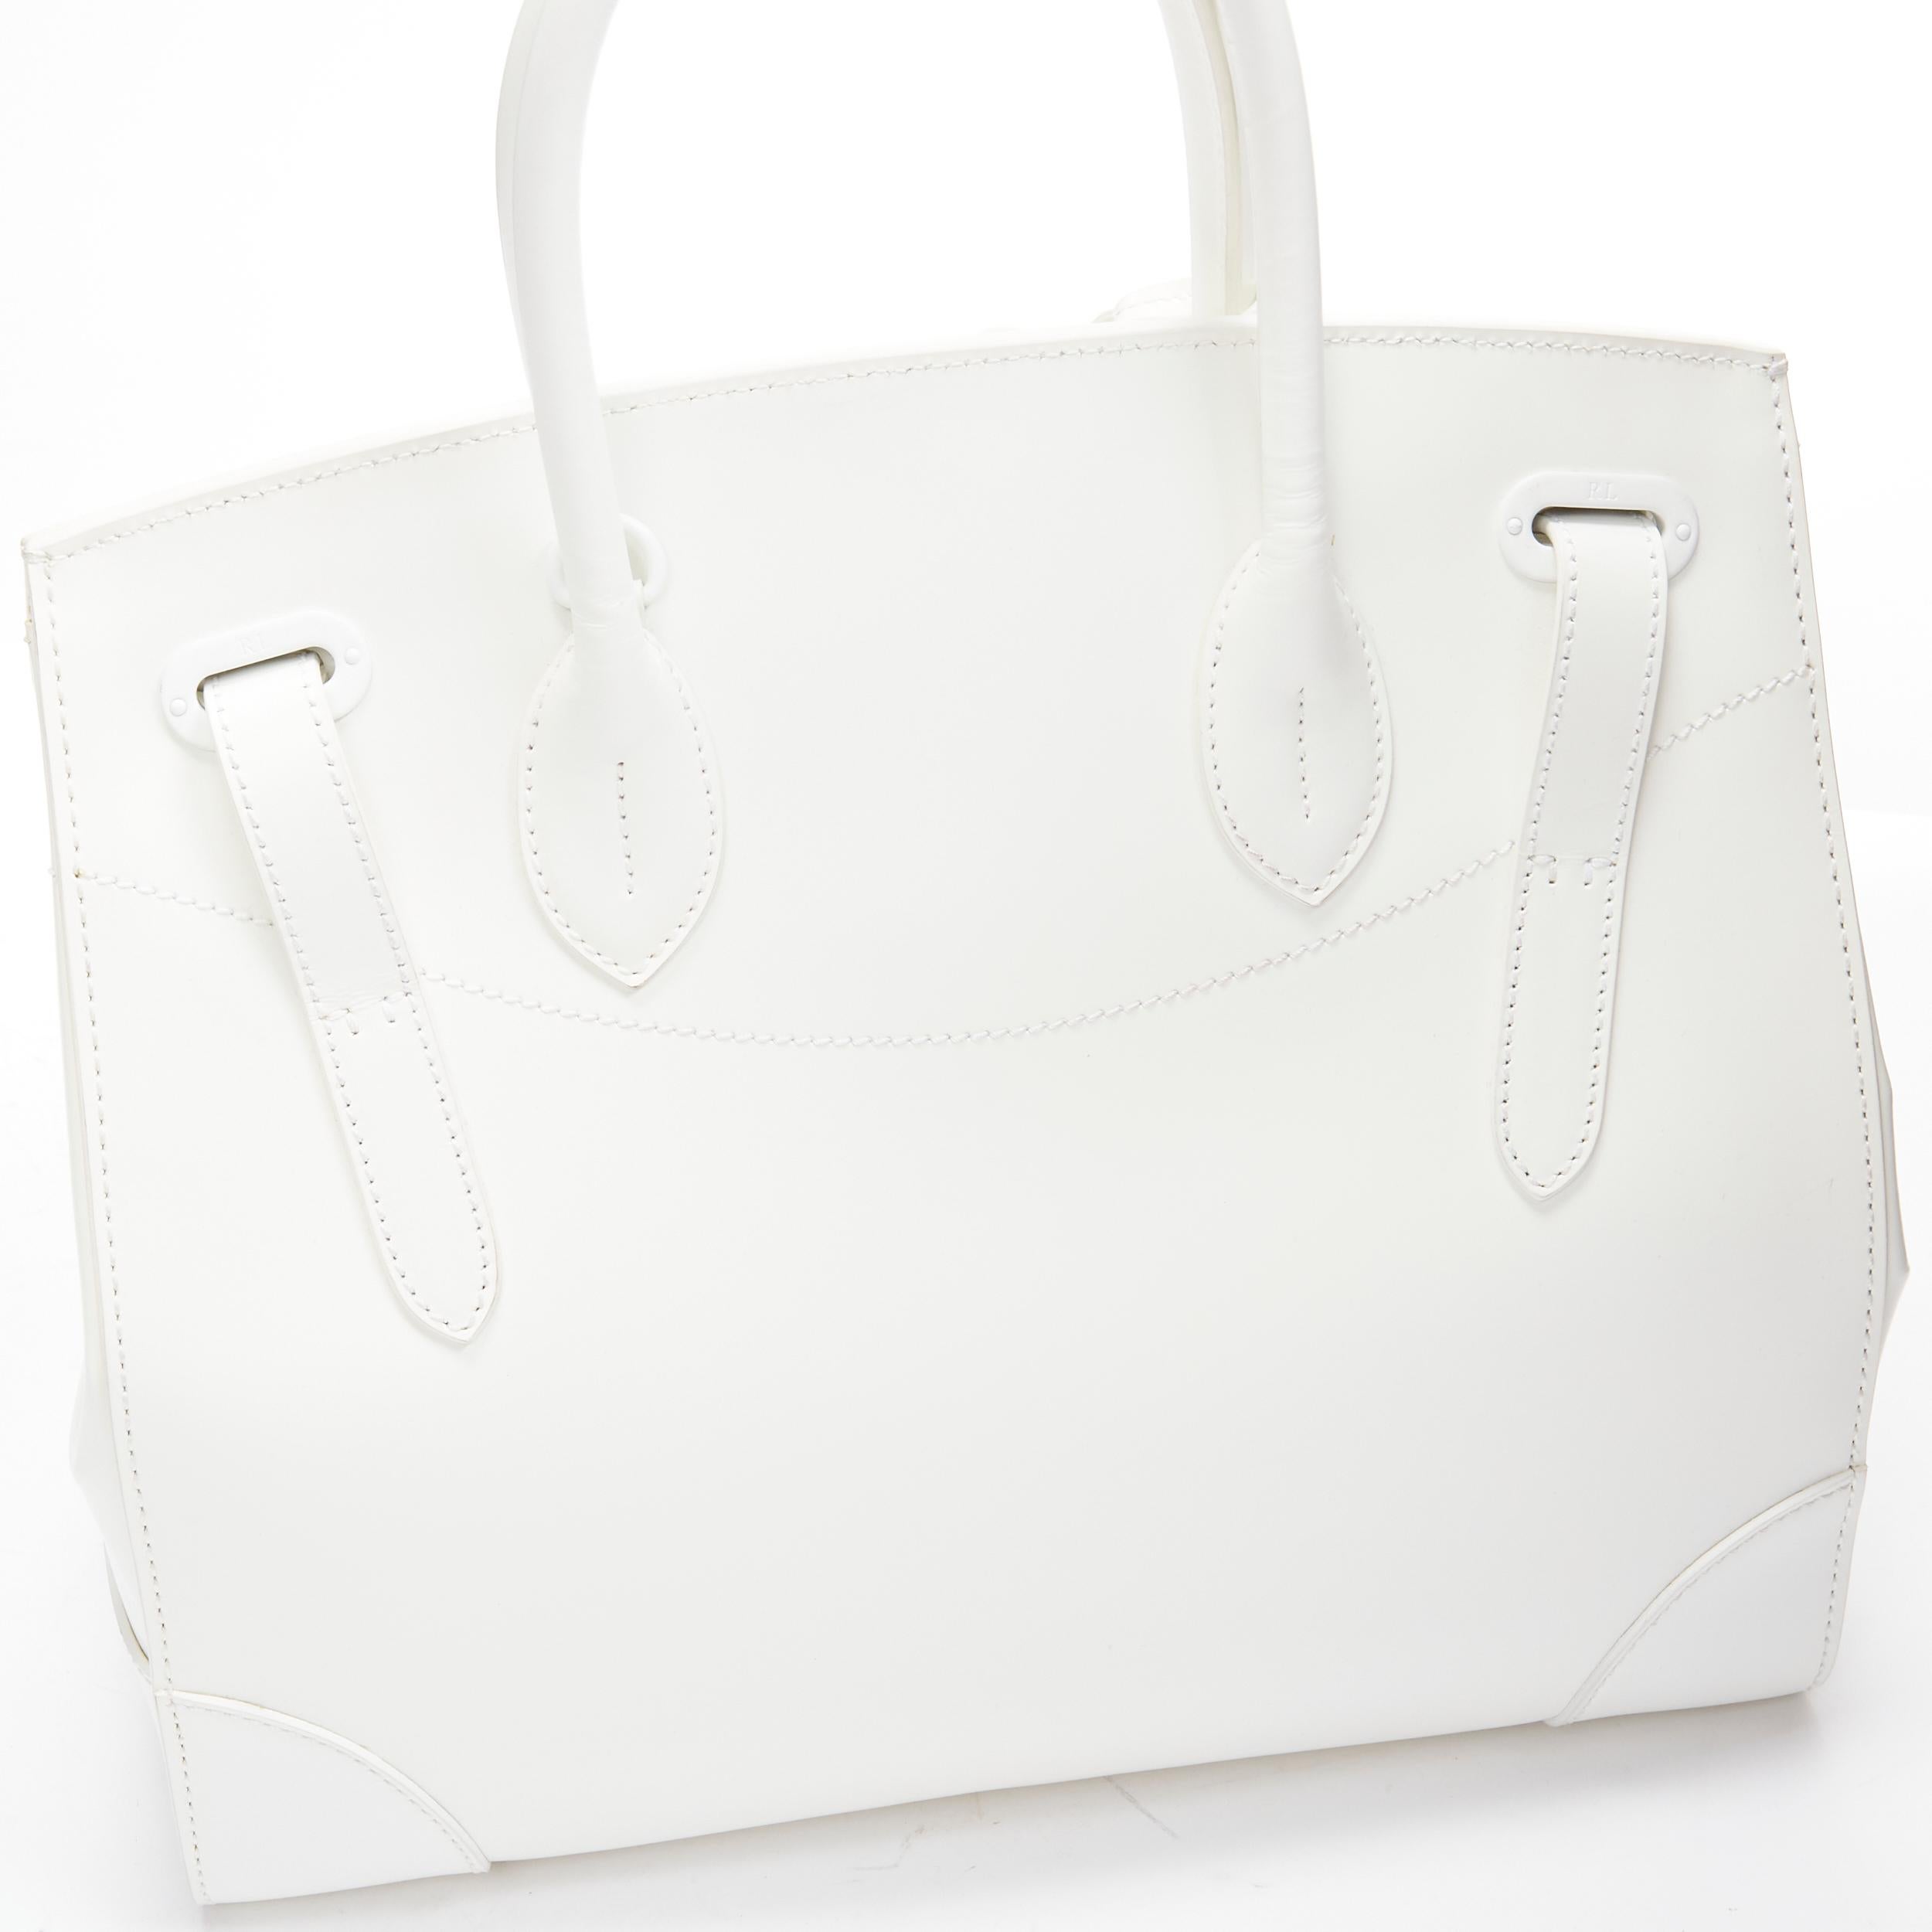 RALPH LAUREN Ricky white smooth leather tonal buckles top handle bag 6